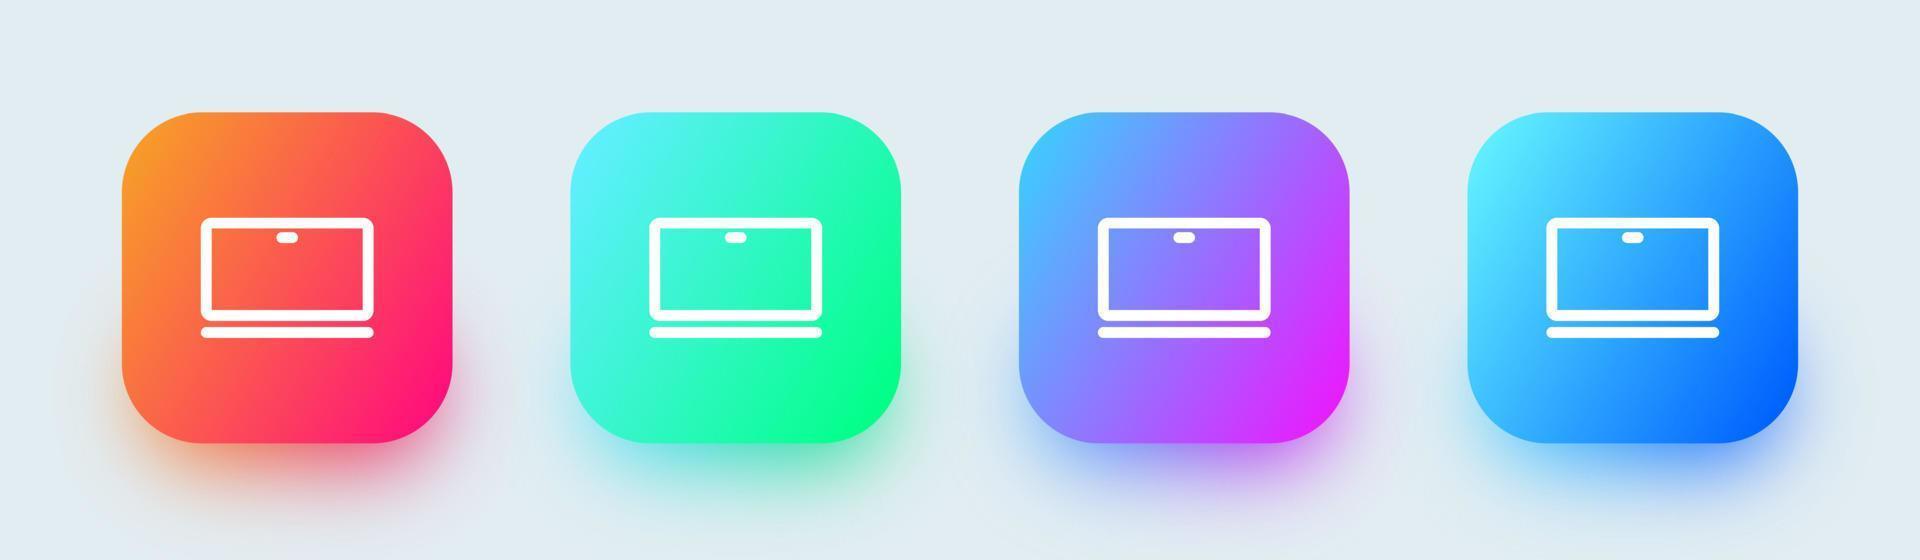 Laptop line icon in square gradient colors. Notebook signs vector illustration.